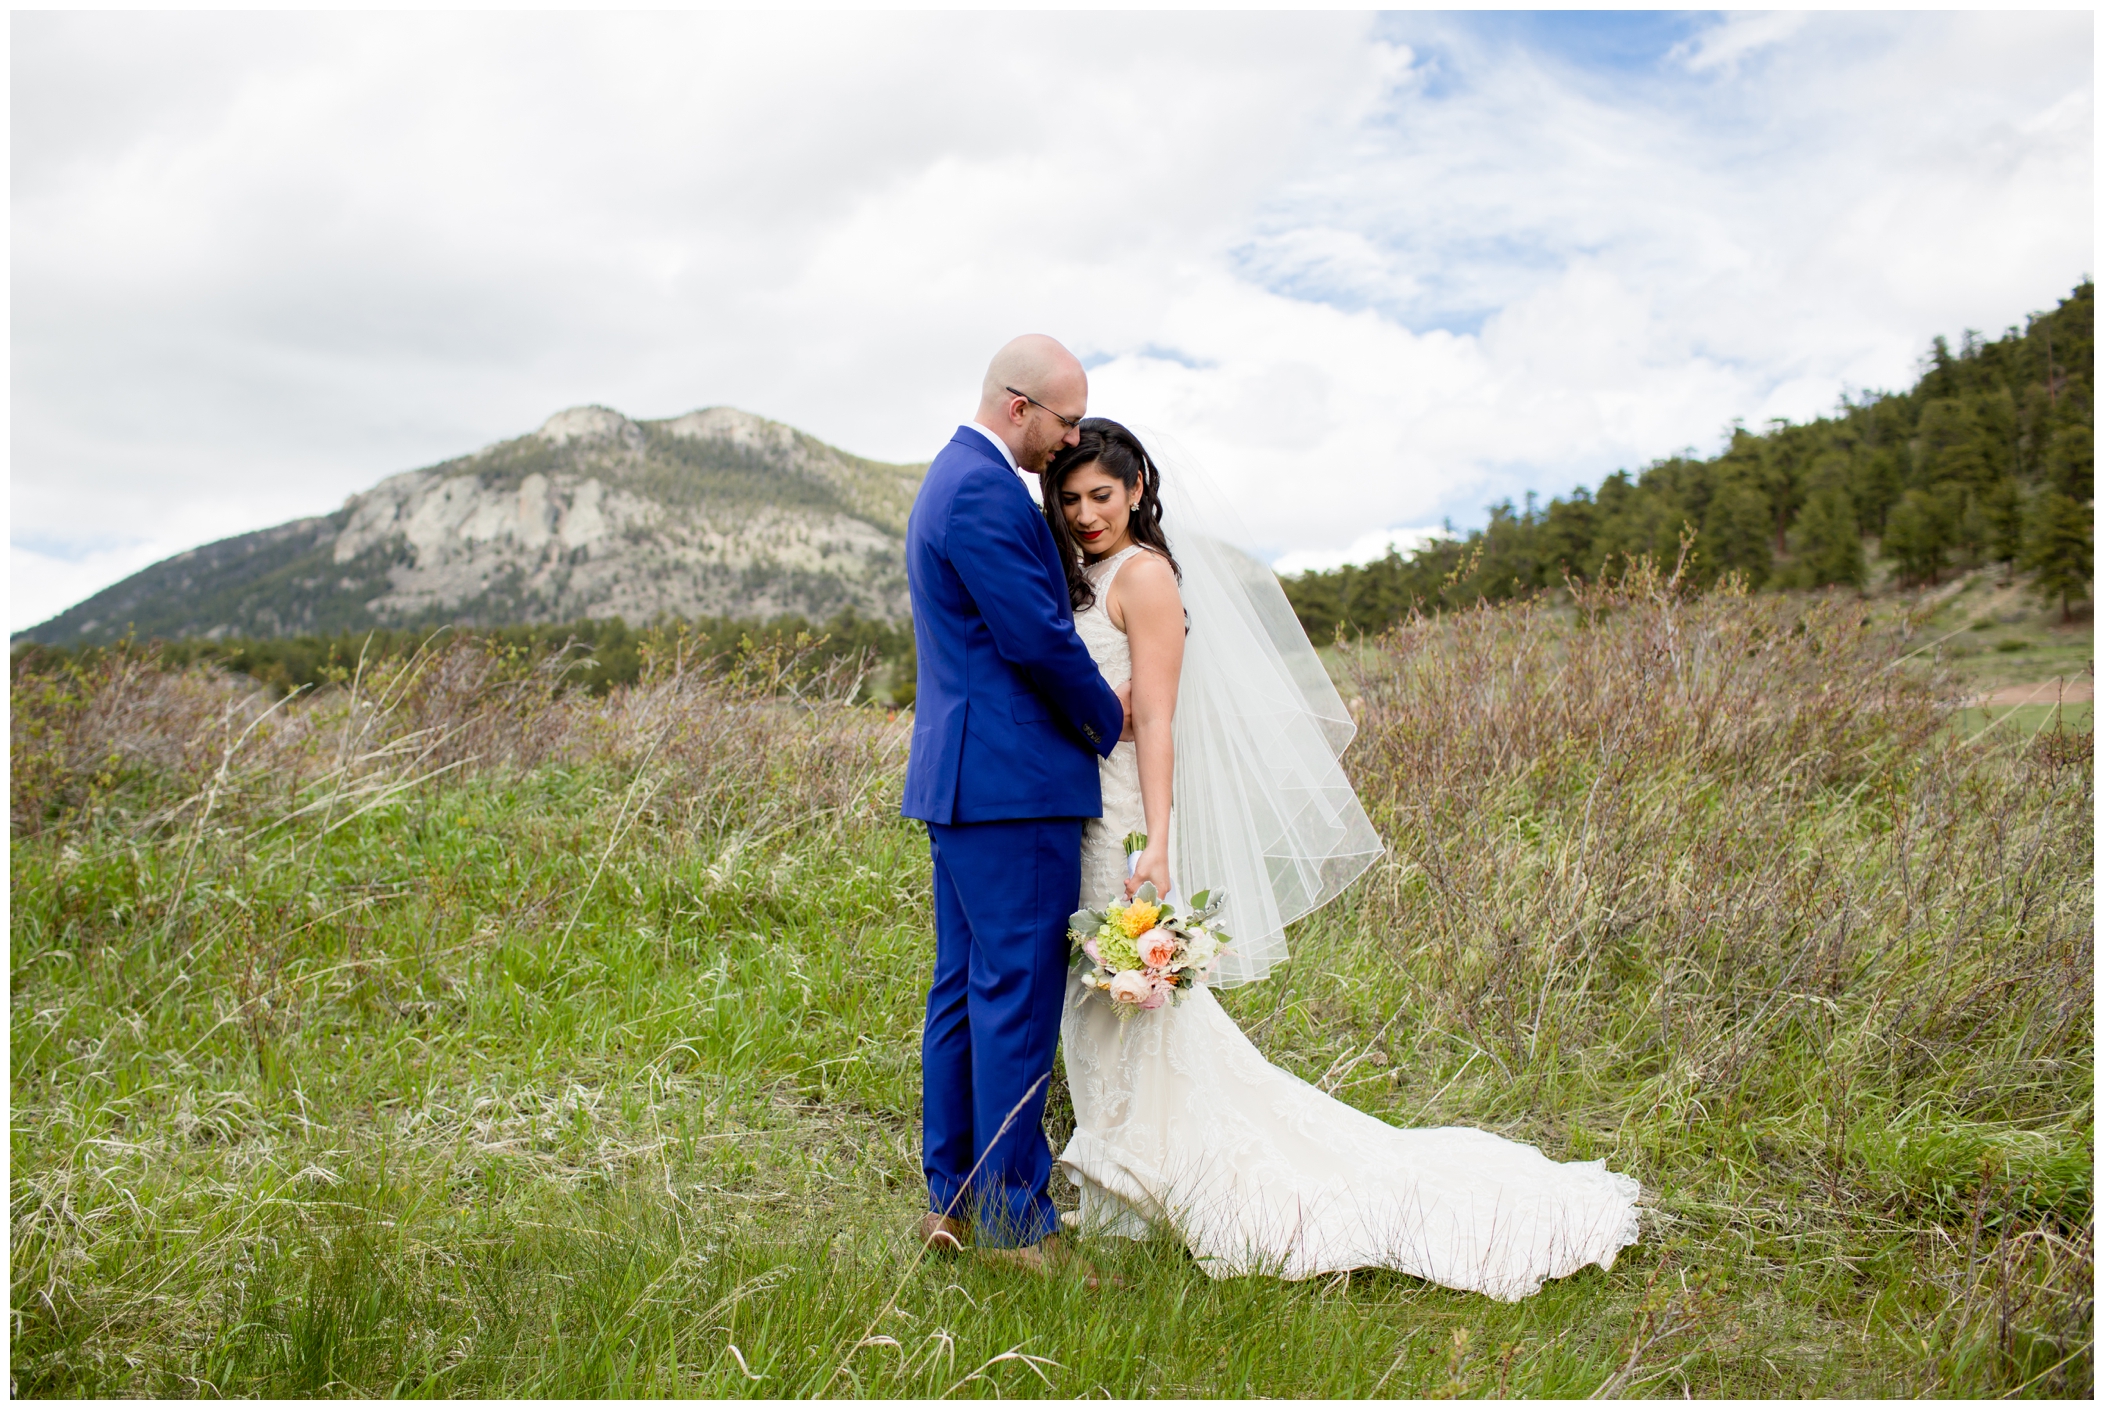 colorful spring wedding photos at rocky mountain national park elopement 